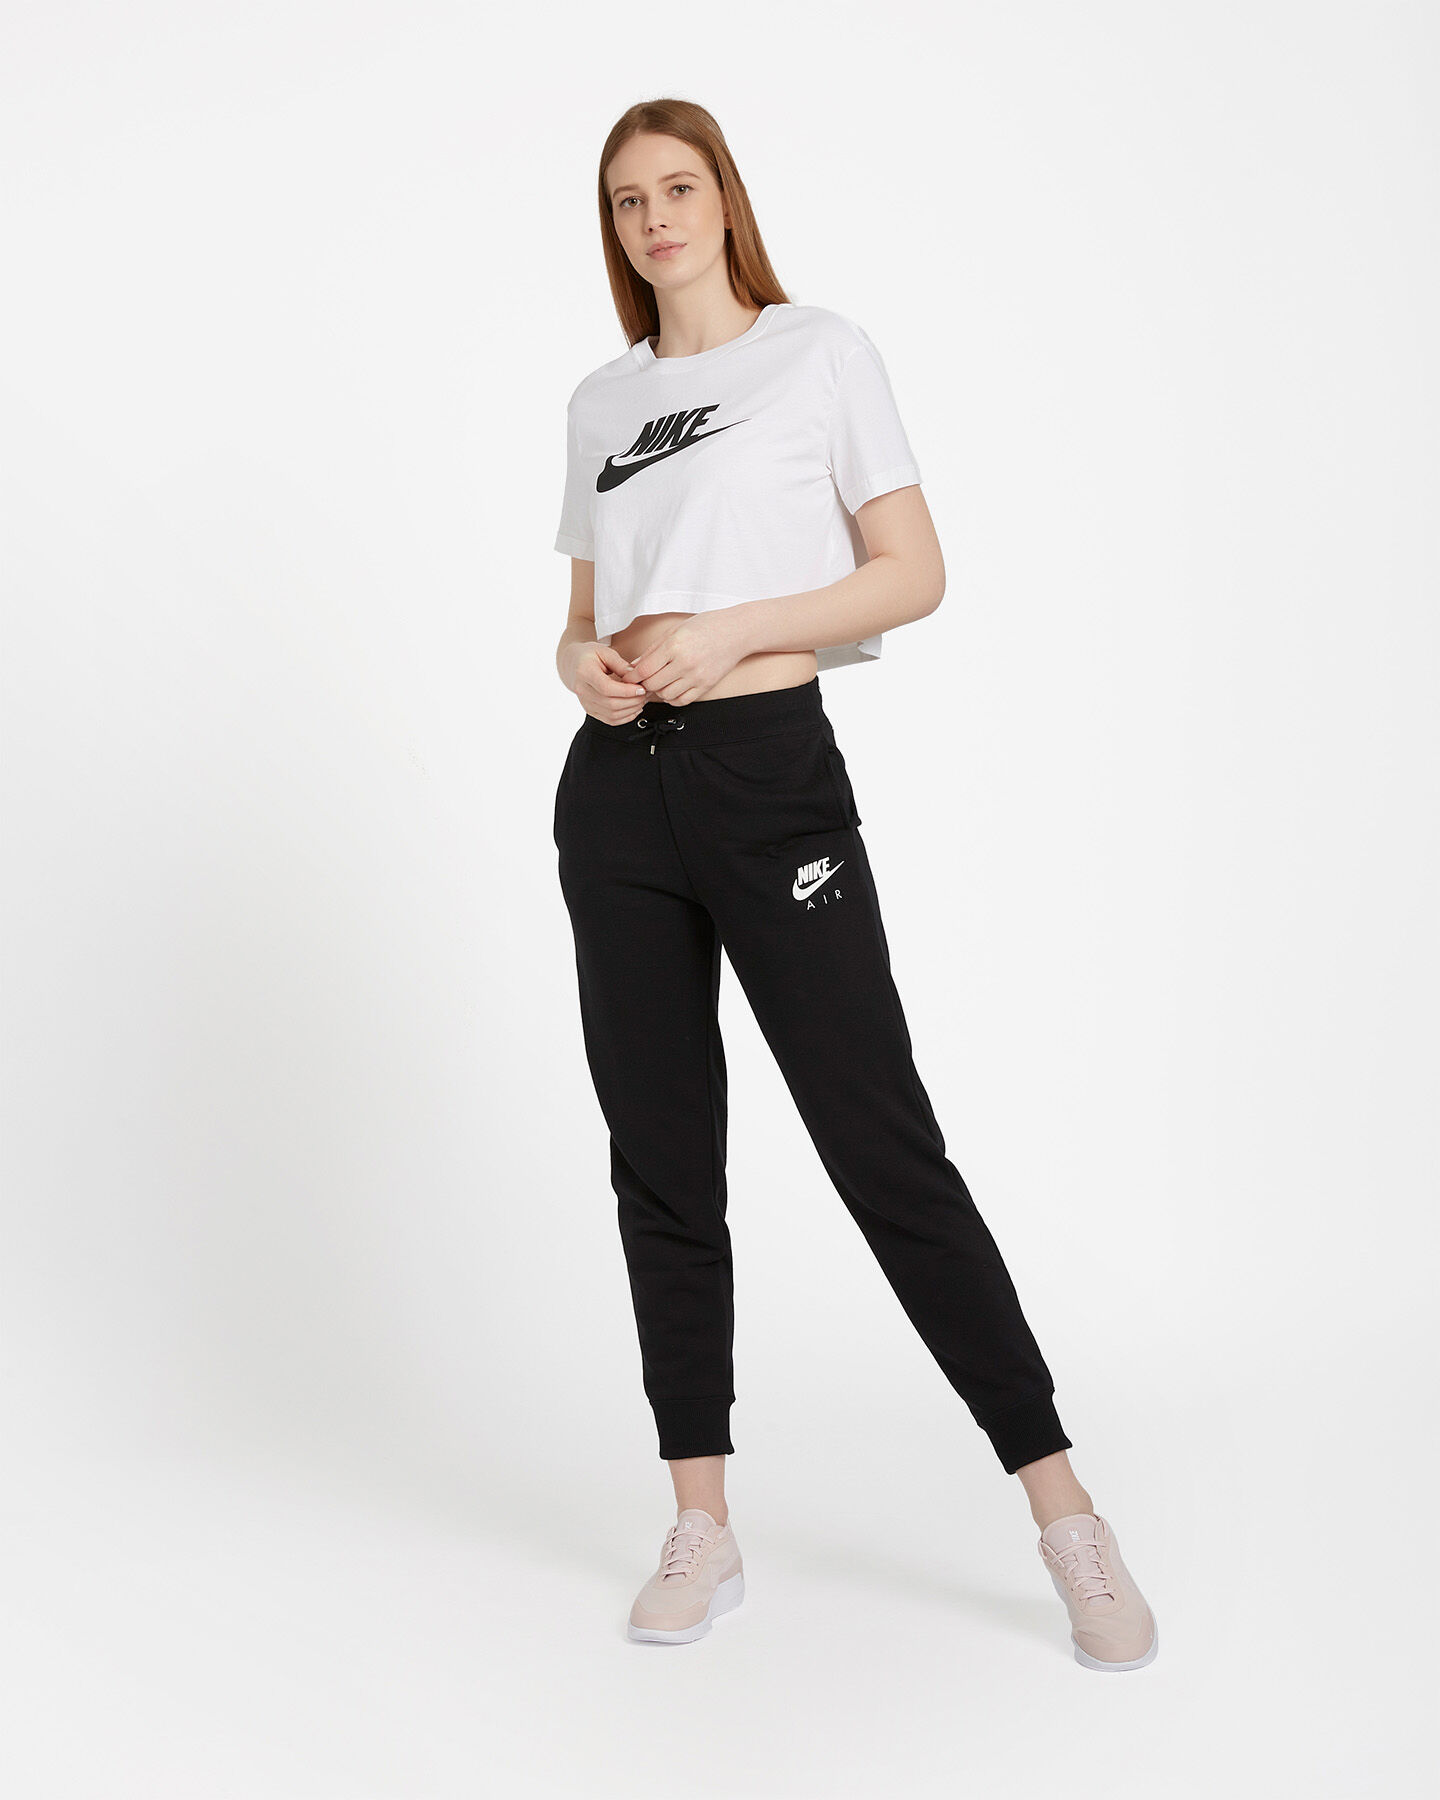  T-Shirt NIKE ESSENTIAL W S2024313 scatto 1